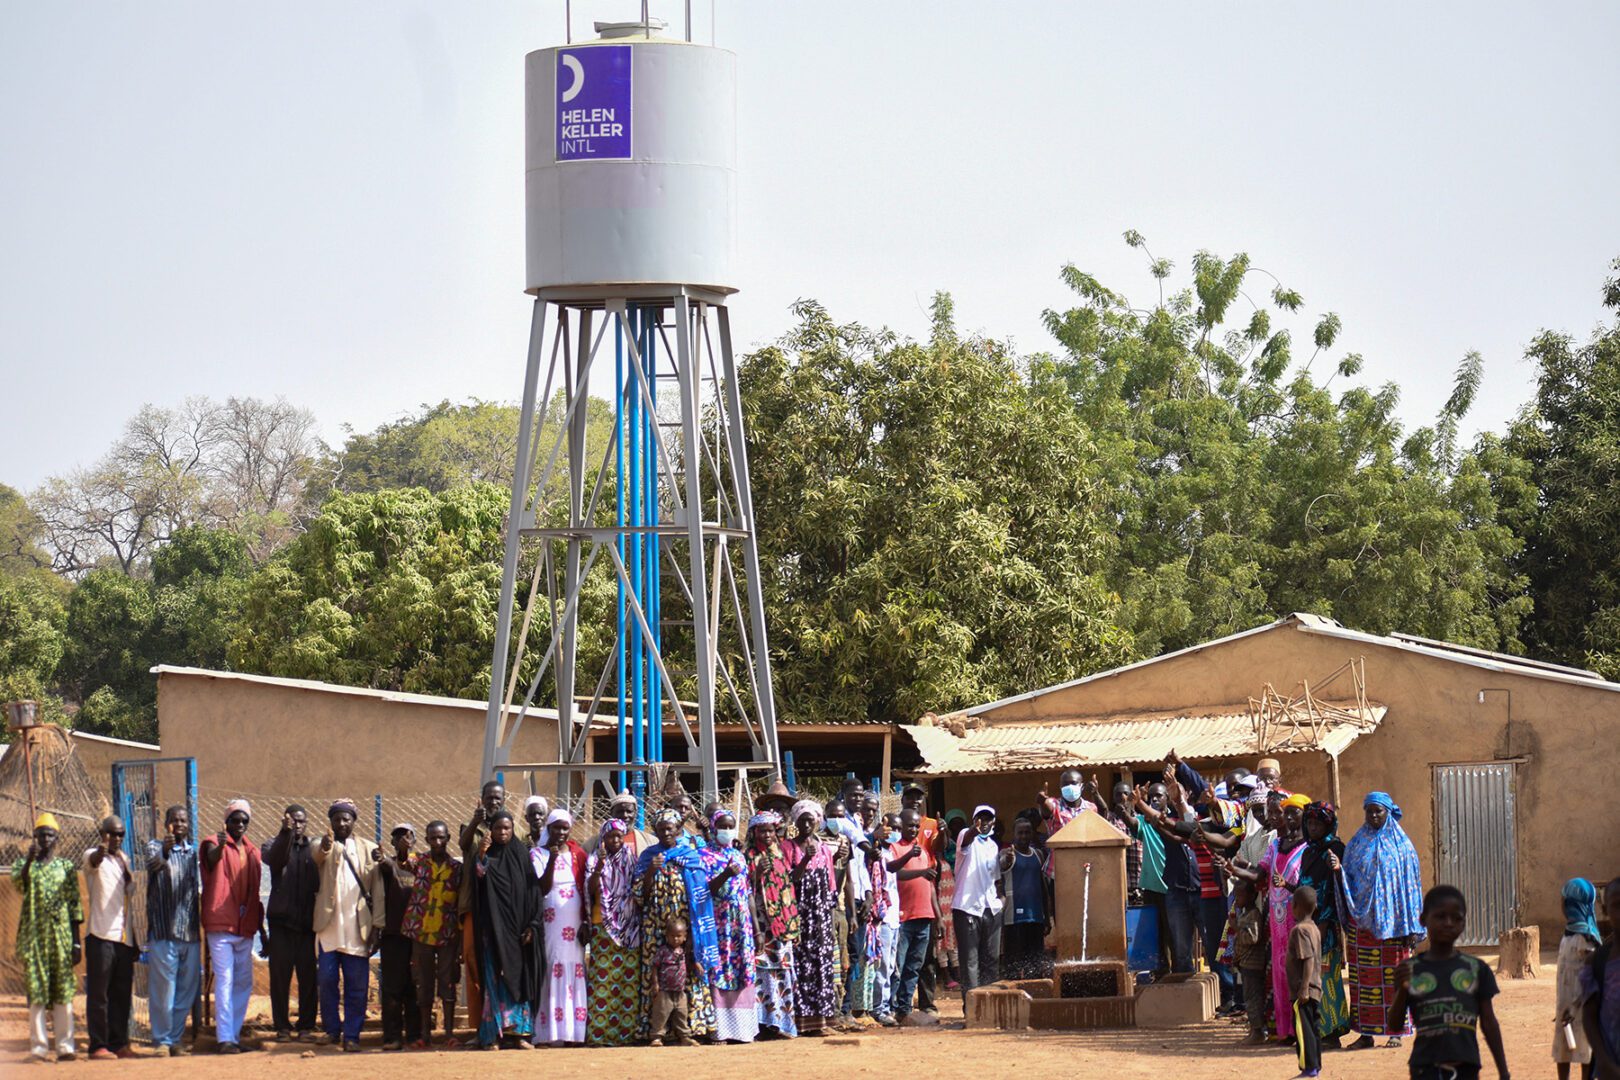 Kamalen village benefits from a borehole and water tower from Helen Keller.